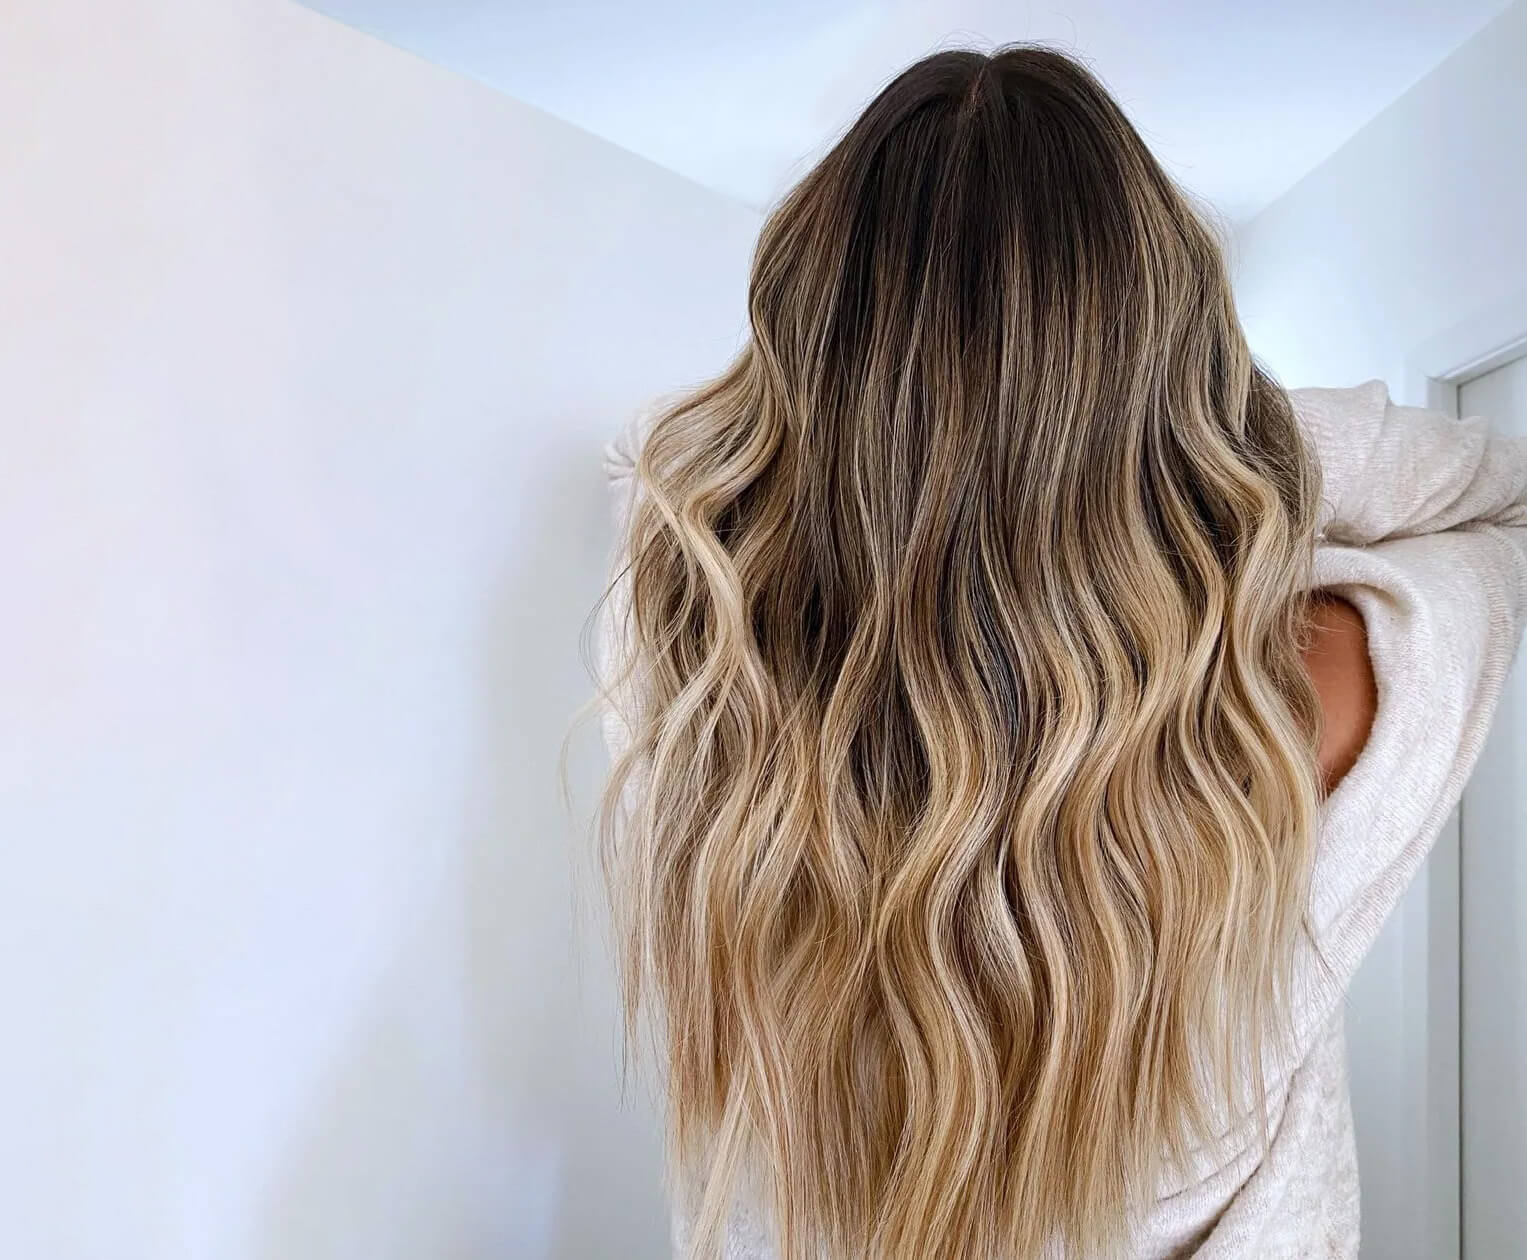 BALAYAGE hair technique at salon toujours belle in Montreal